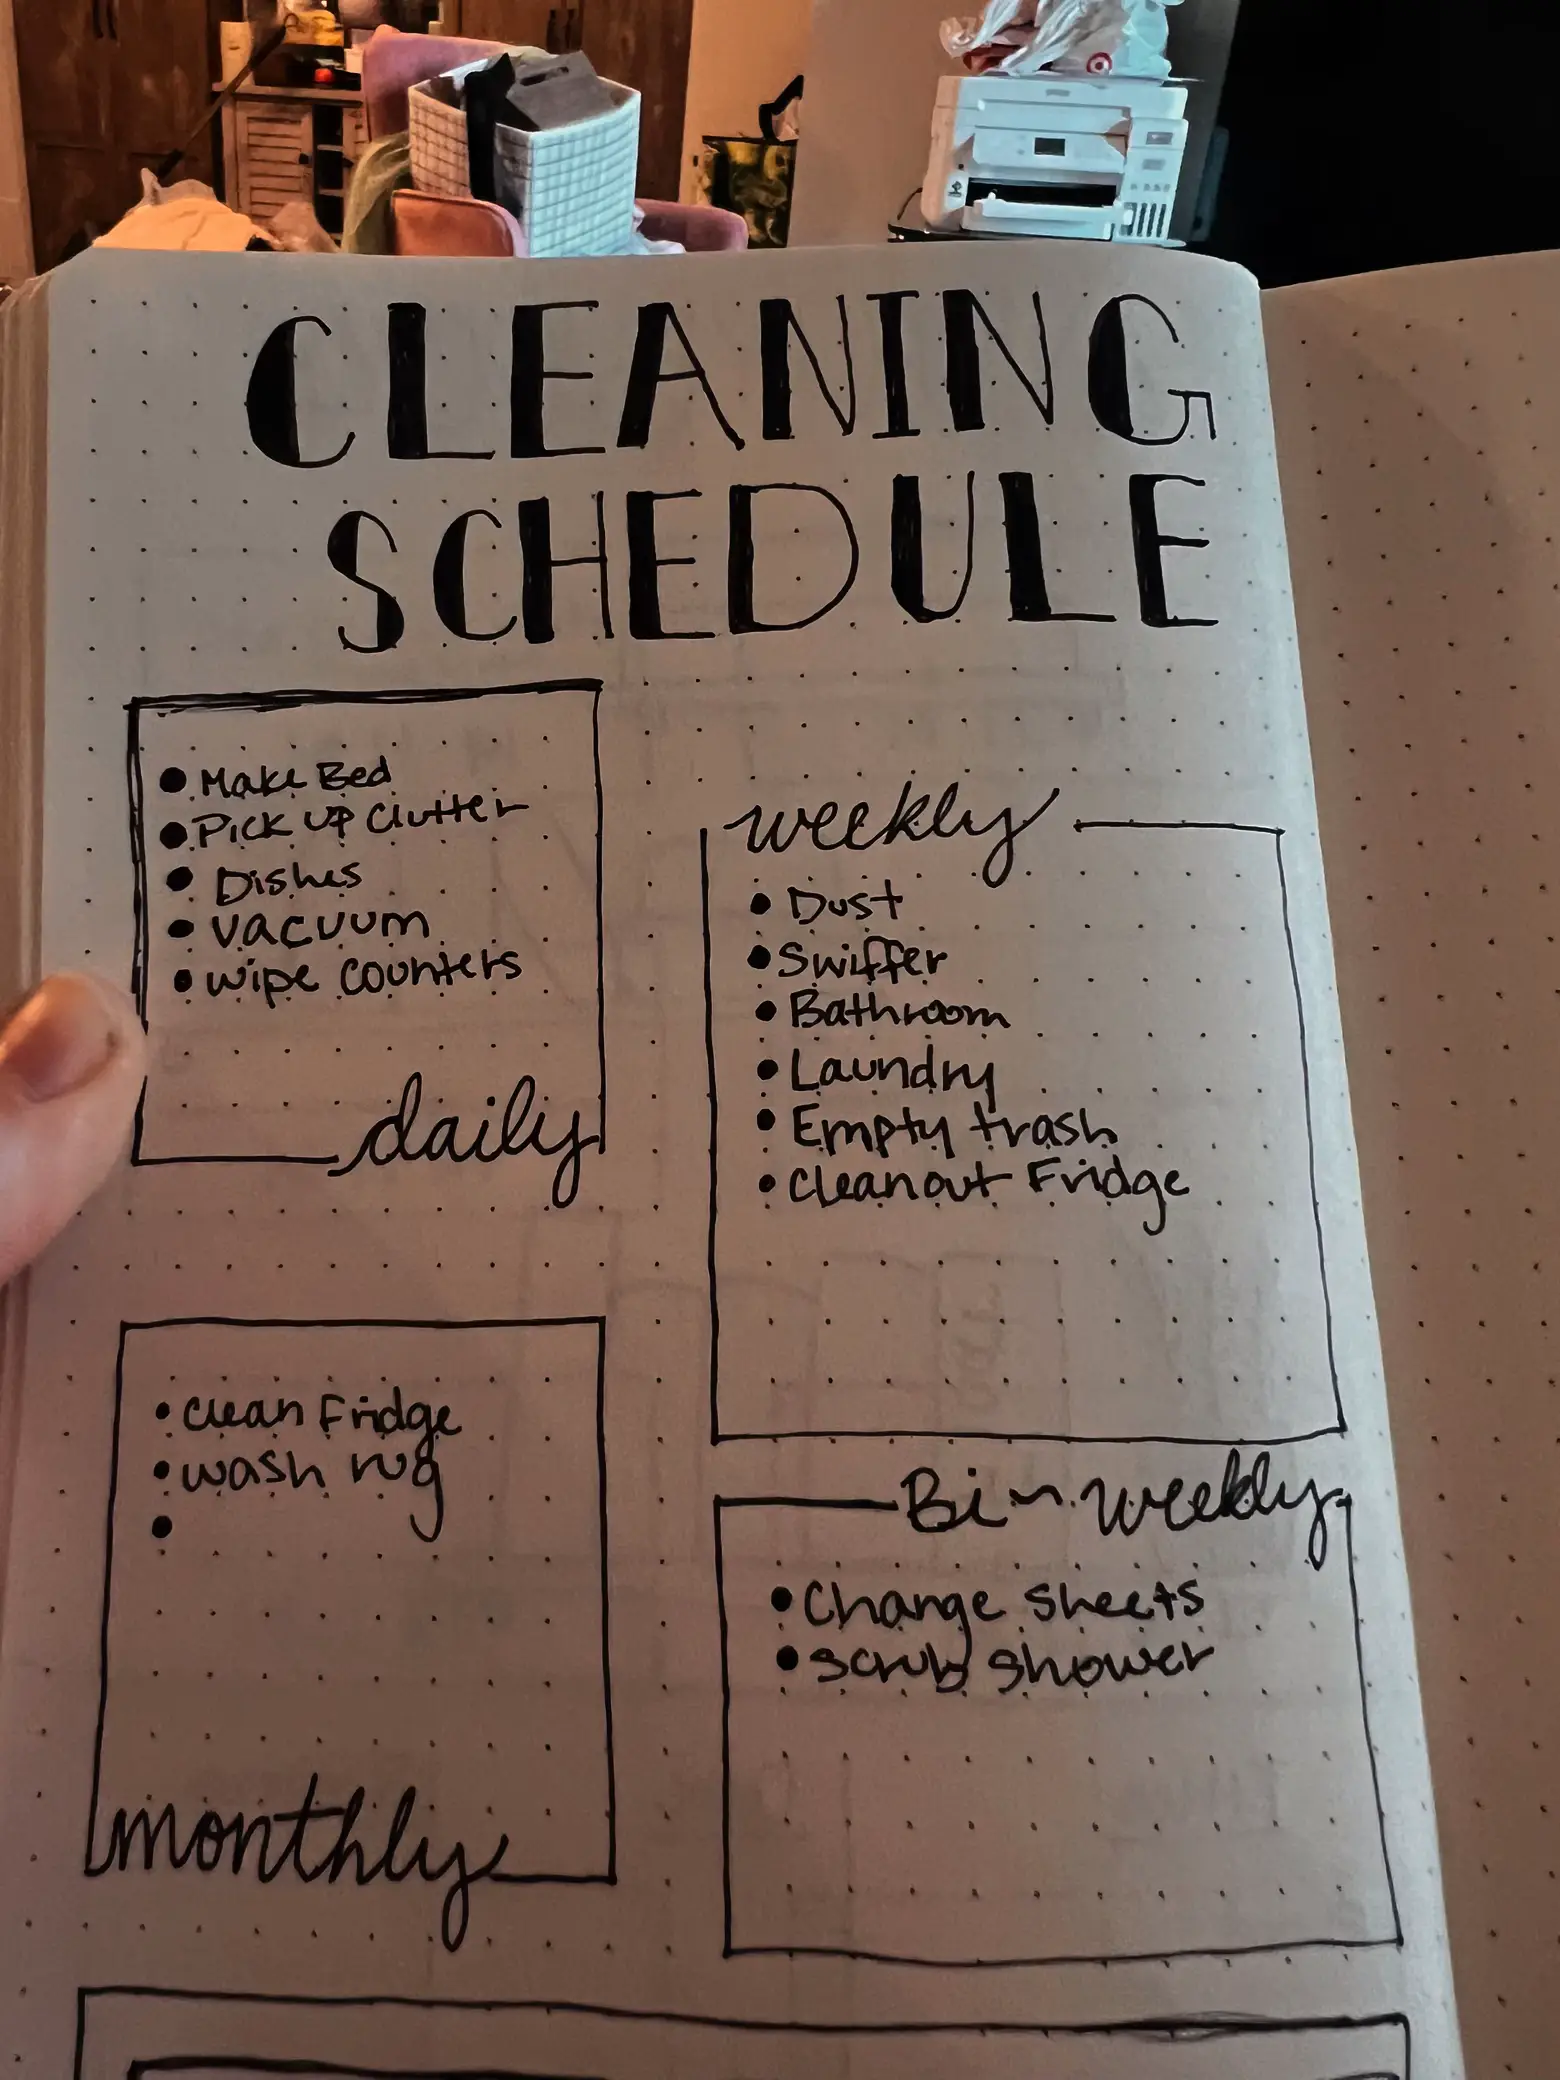 Archer and Olive Bullet Journal Review - Rae's Daily Page